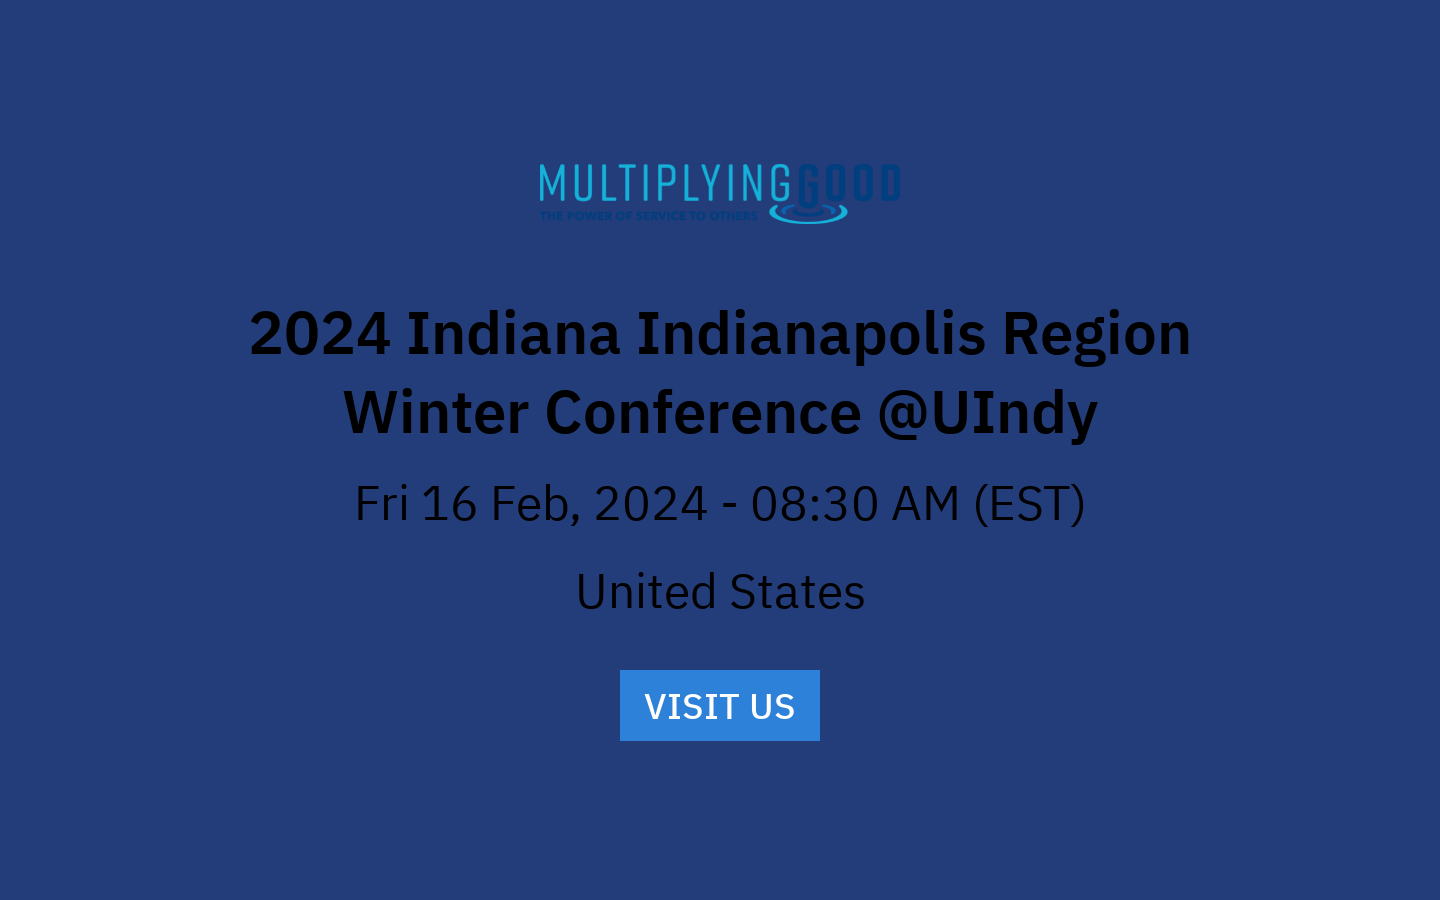 2024 Indiana Indianapolis Region Winter Conference UIndy